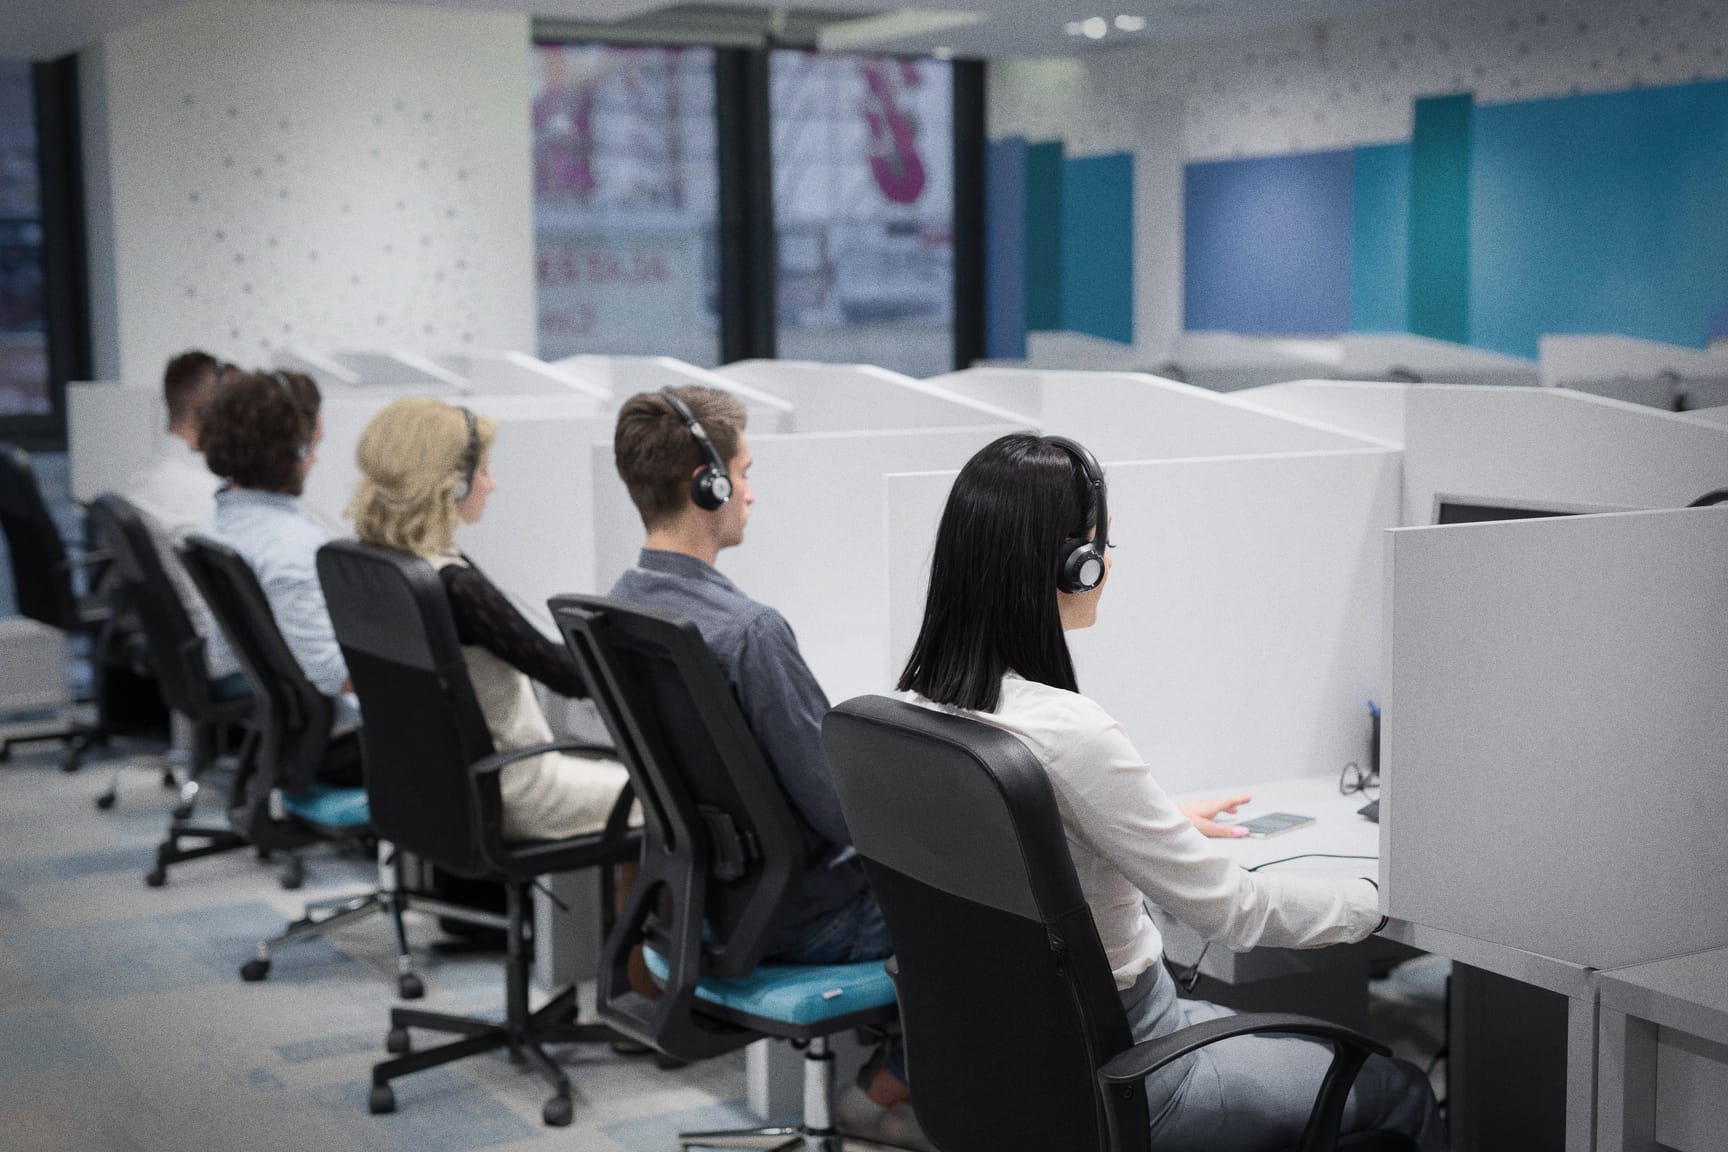 U.S. Contact Center Hiring Trends for 2022